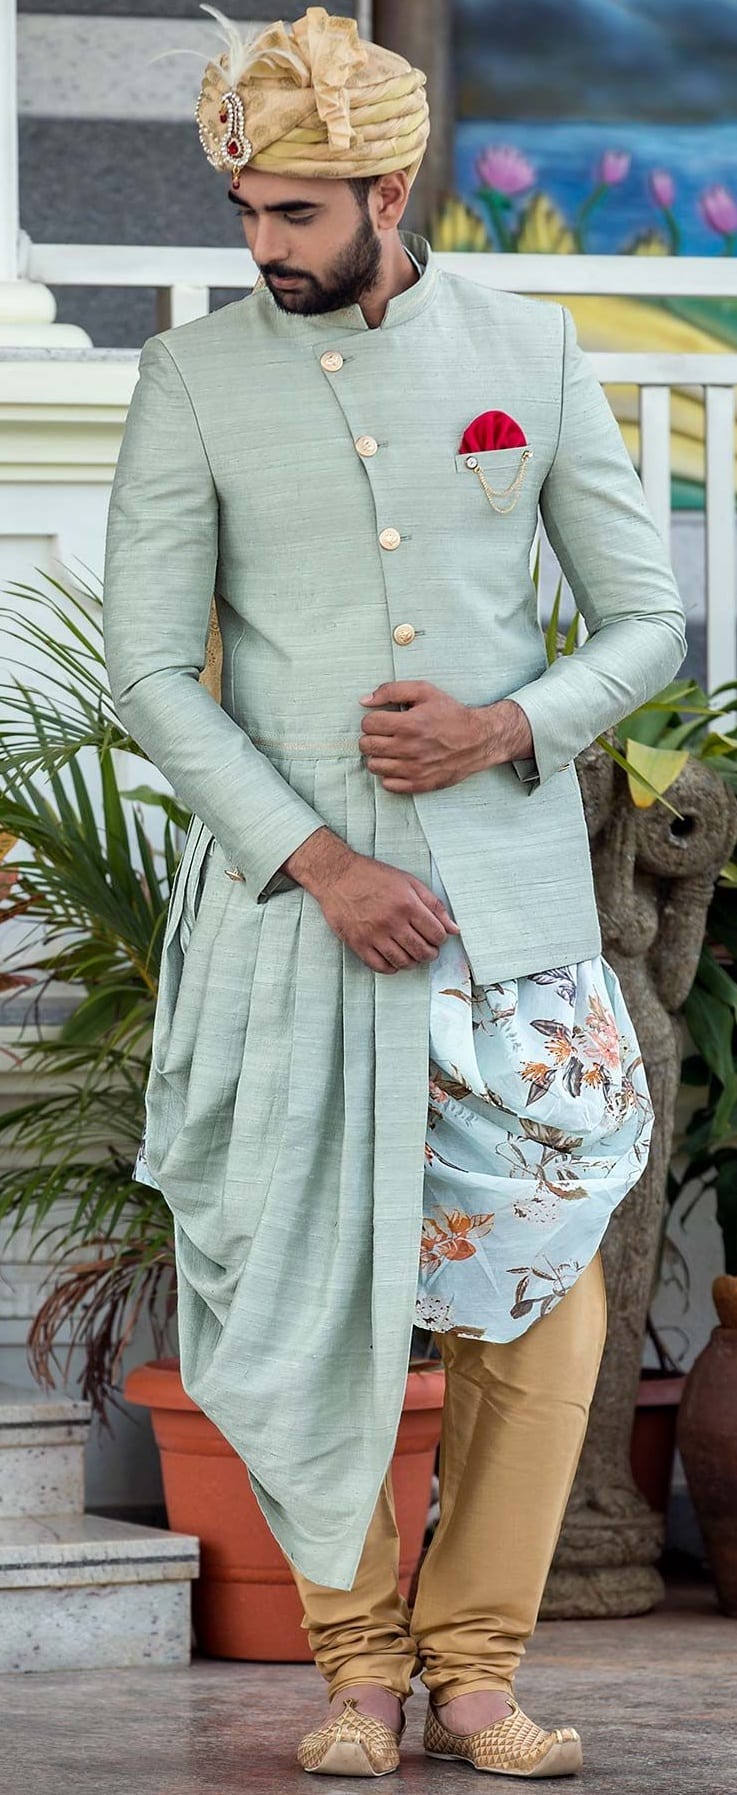 Trendy Wedding Outfit ideas for men